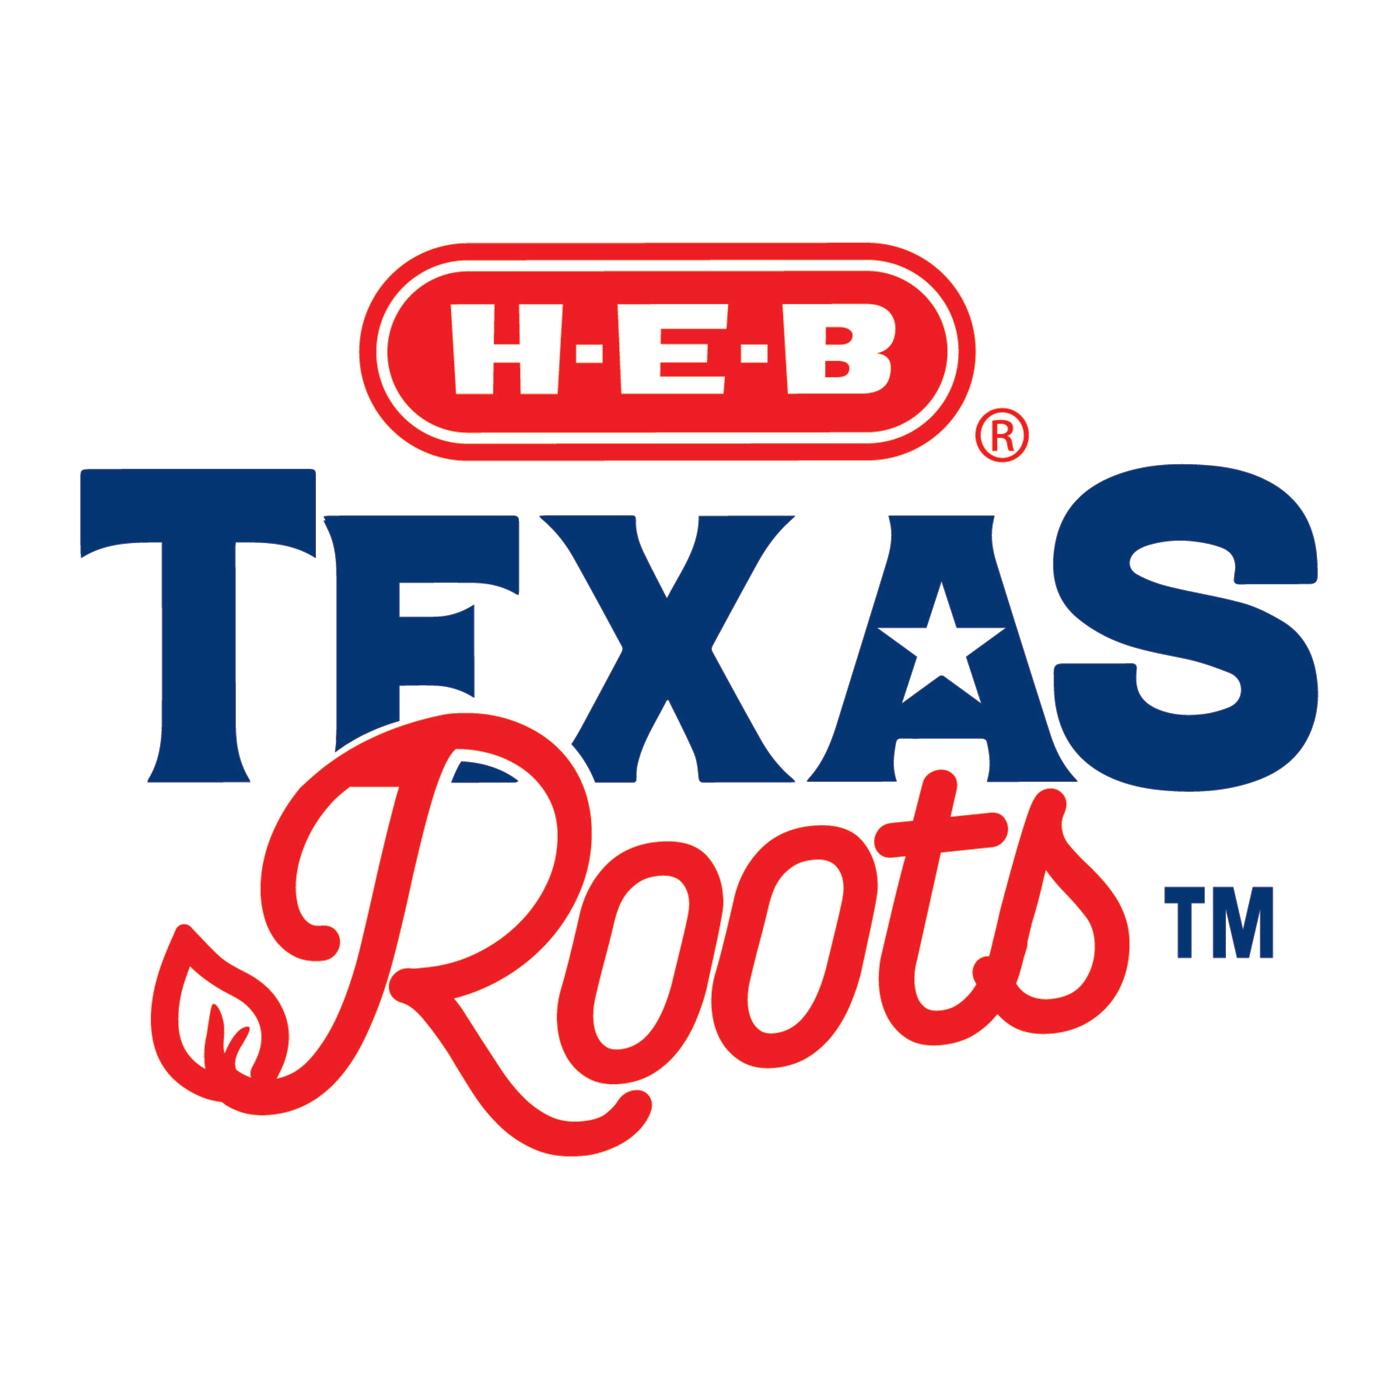 H-E-B Texas Roots Mosquito Repeller; image 2 of 3